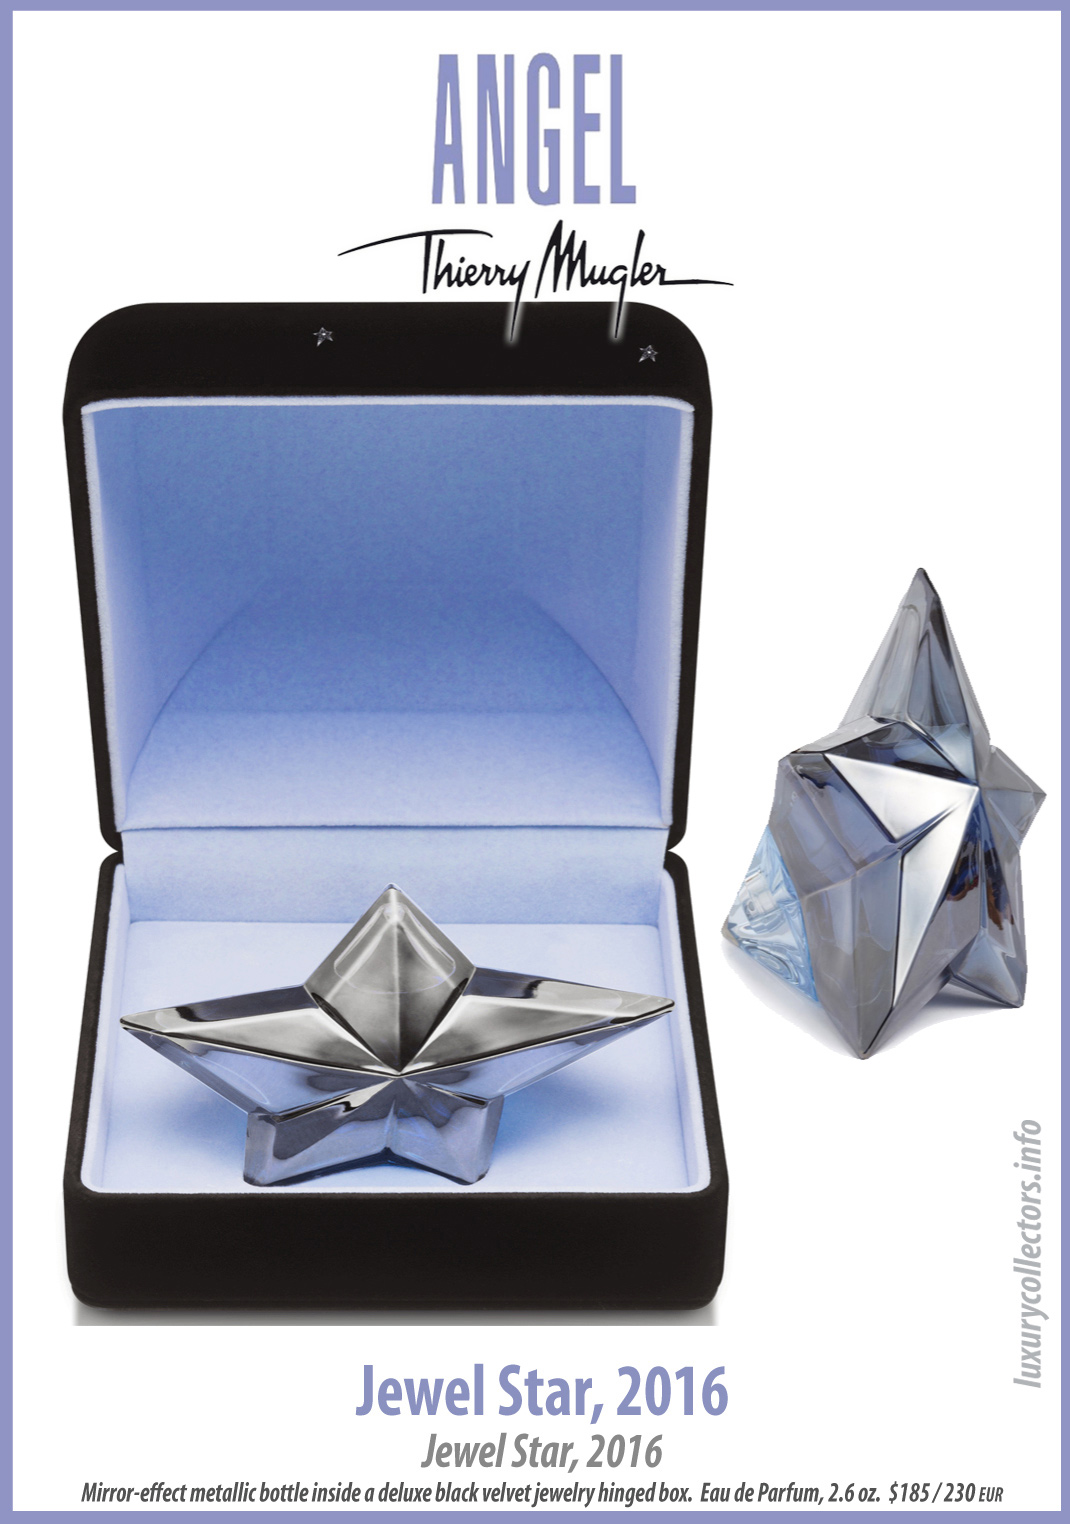 Thierry Mugler Angel Perfume Collector's Limited Edition Bottle 2016 Jewel Star